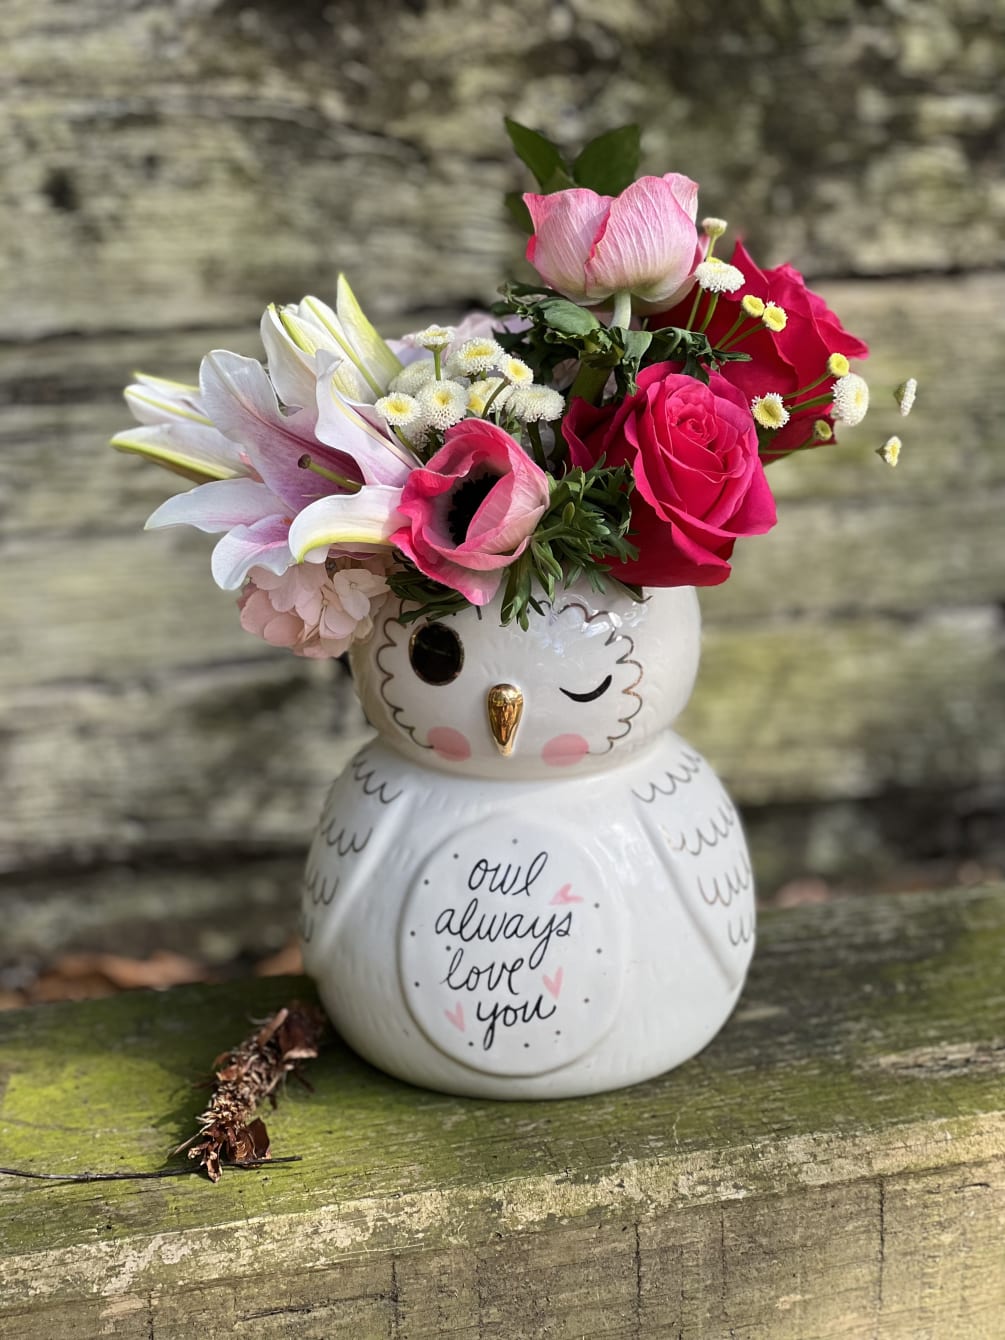 Awesome keepsake Owl. Pot a plant, store spoons in kitchen&hellip;sure to be